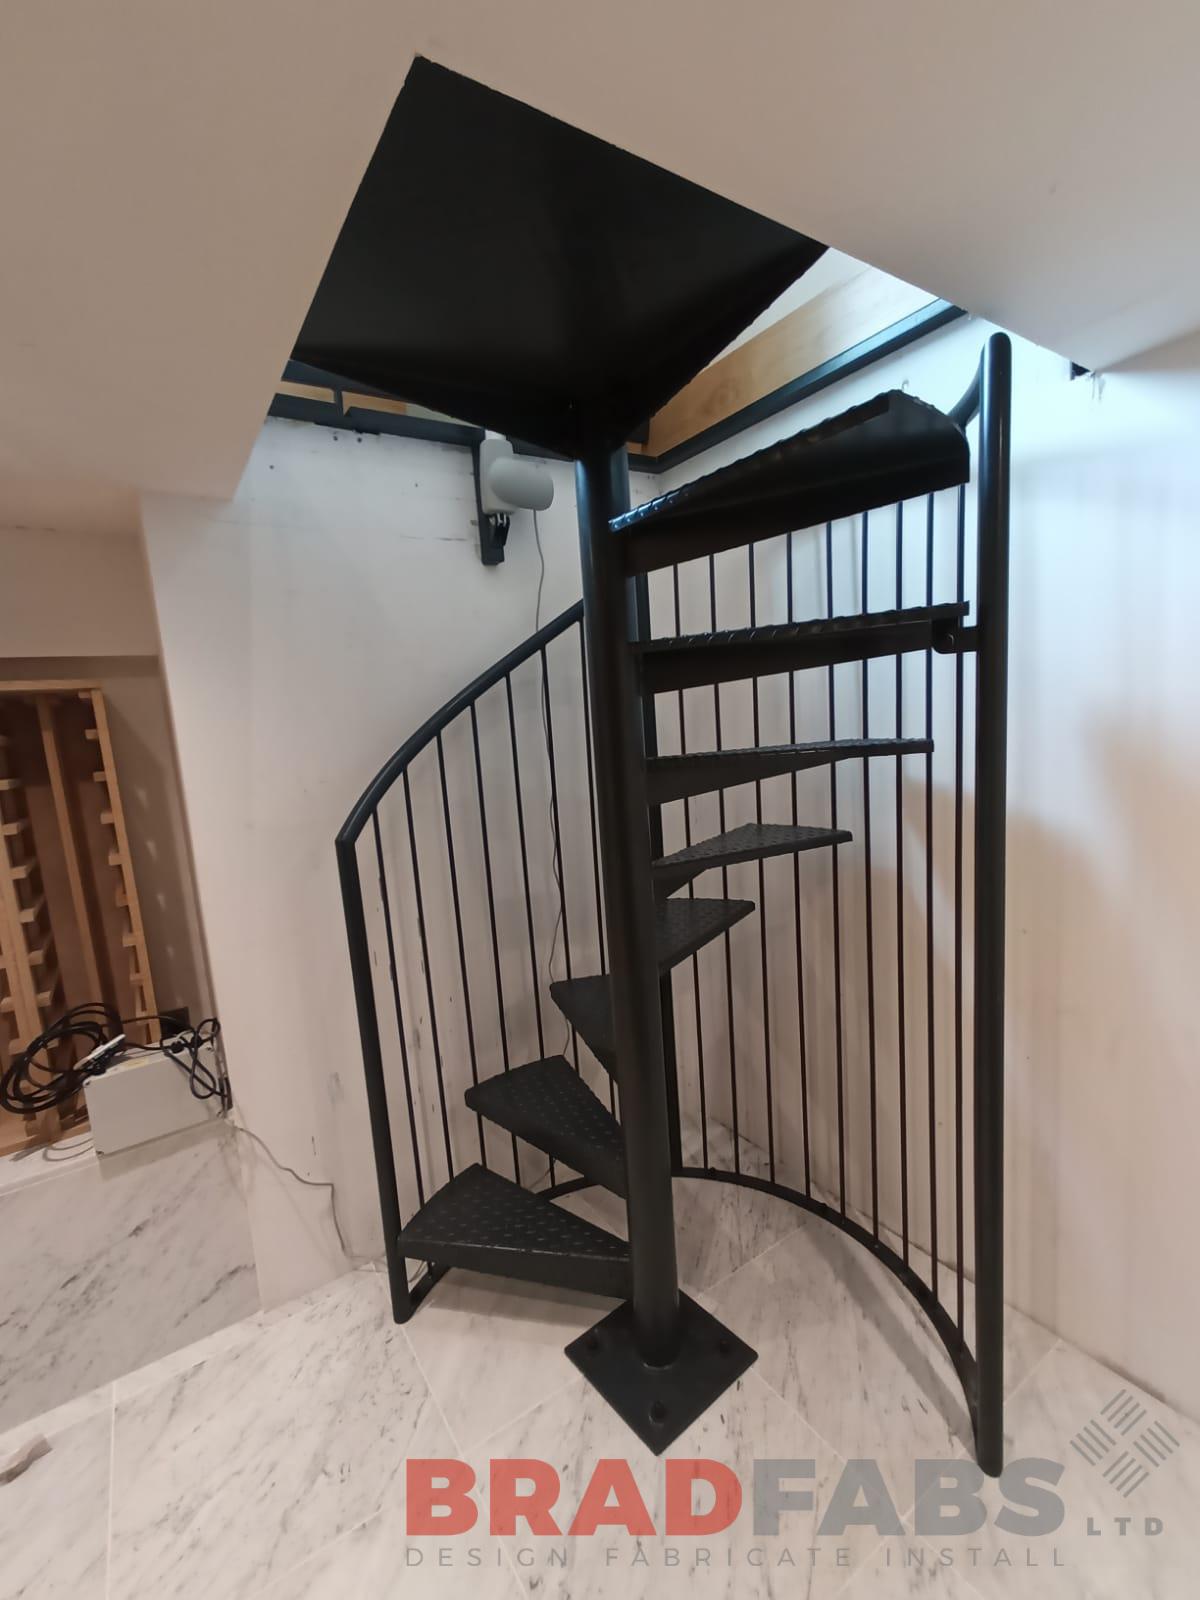 Bradfabs, spiral staircase, bespoke staircase, internal staircase, mild steel and powder coated staircase, vertical bar balustrade, durbar treads 